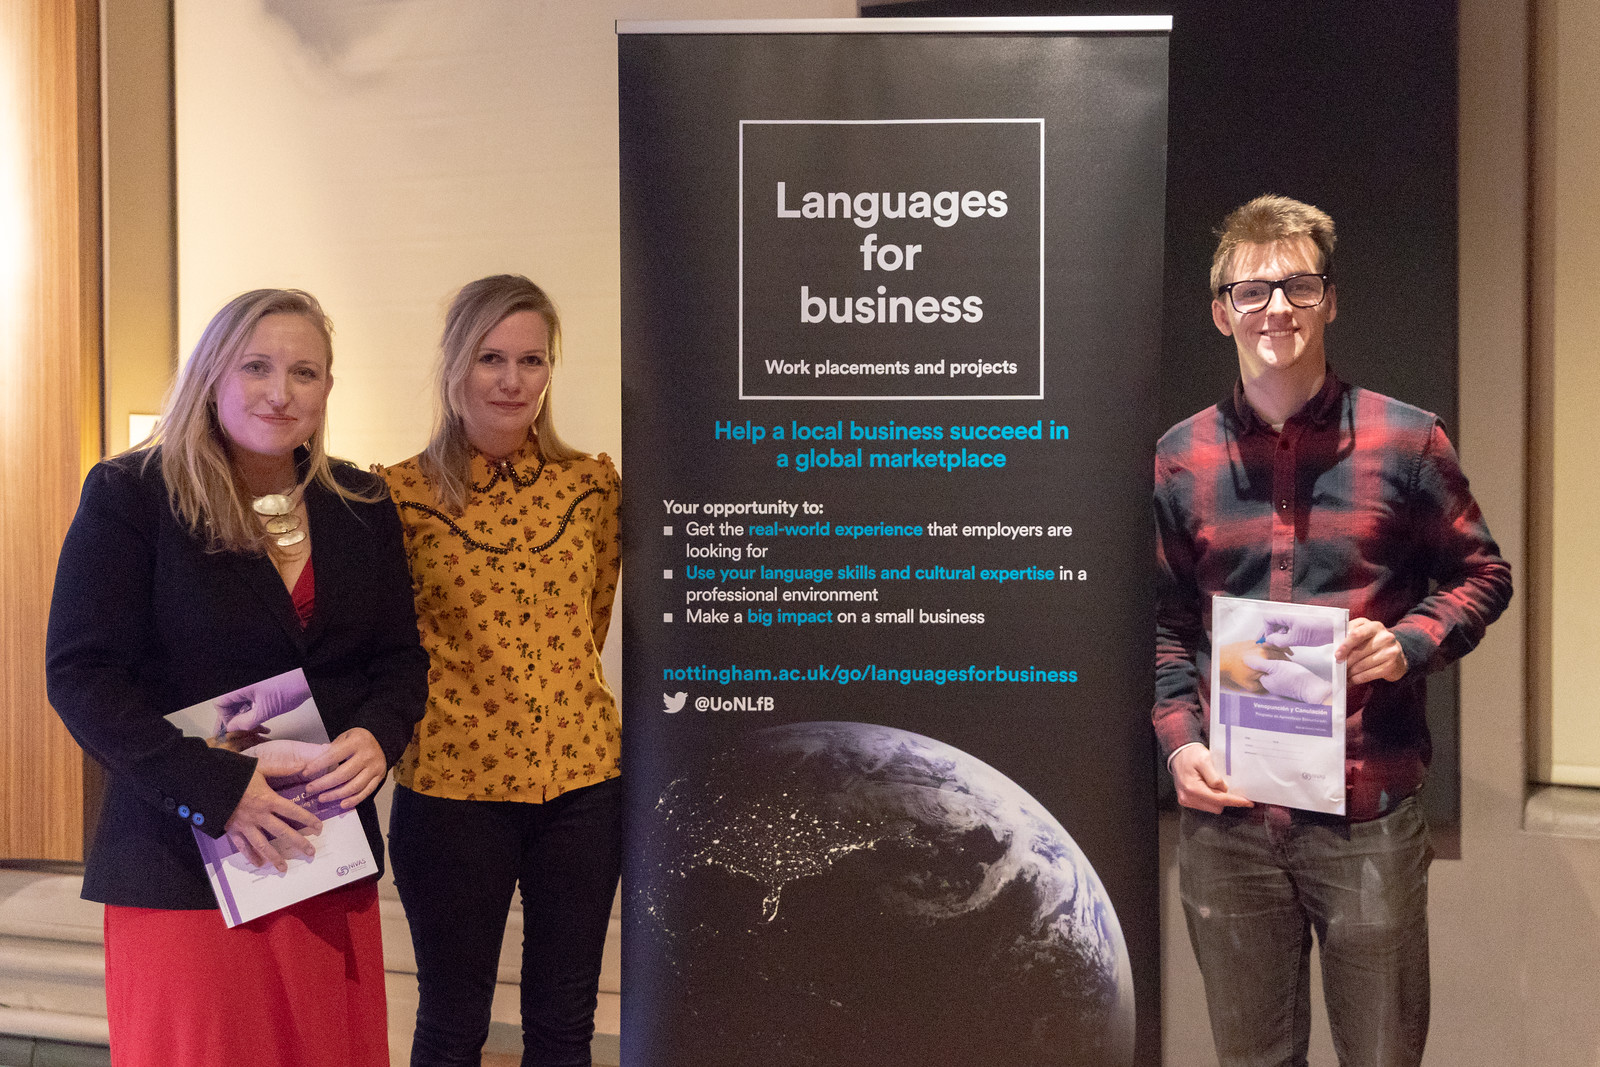 Languages for Business event